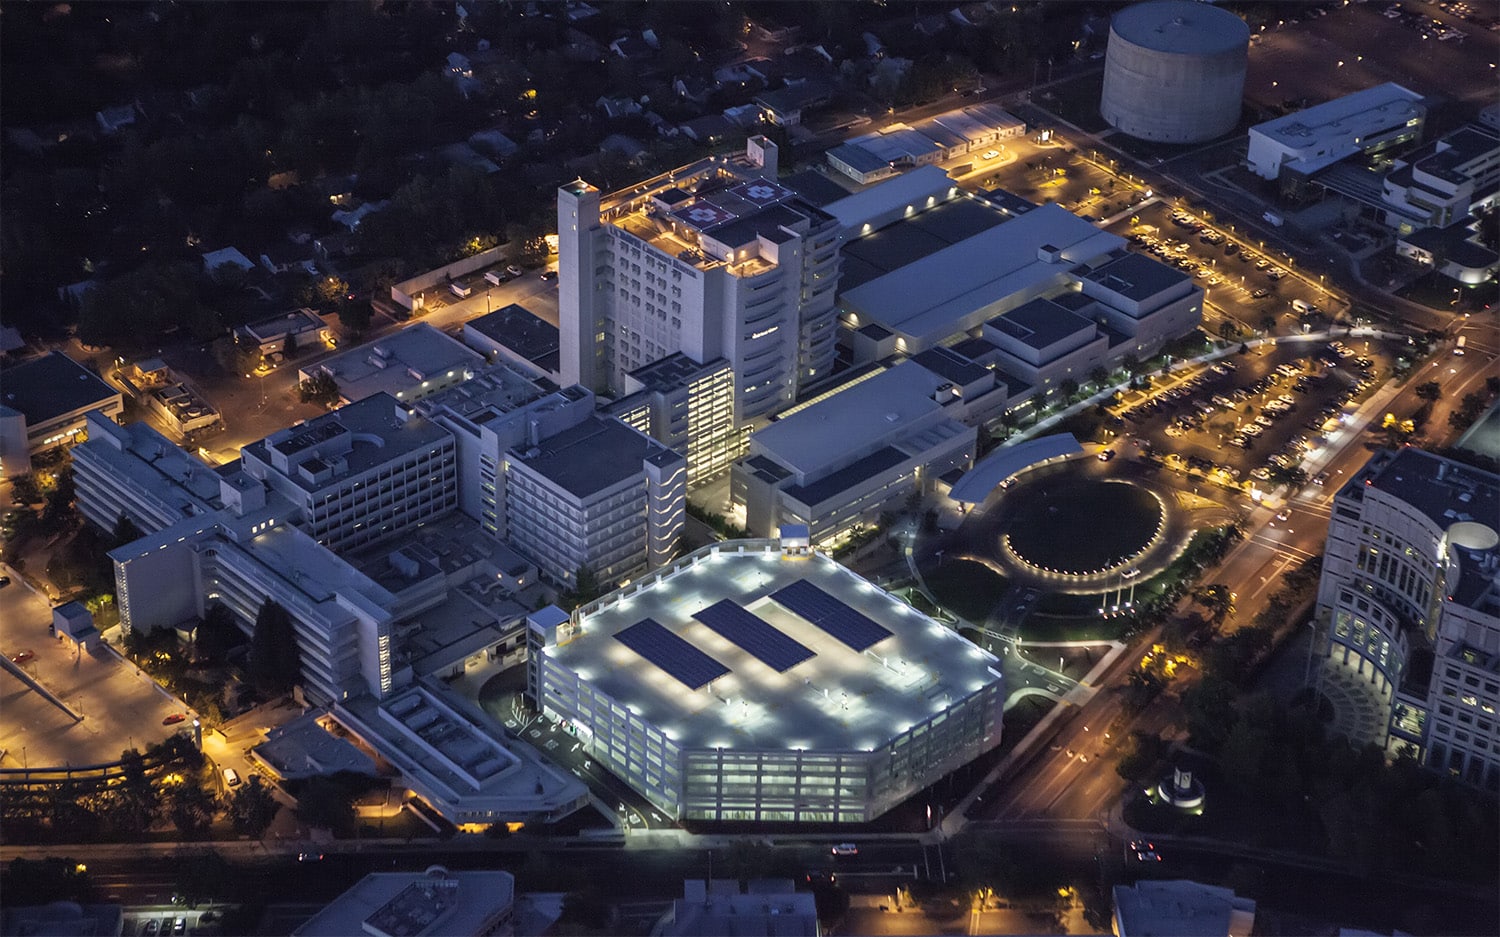 Aerial view of UC Davis Medical Center at night, illuminated buildings and streets bustling with activity.